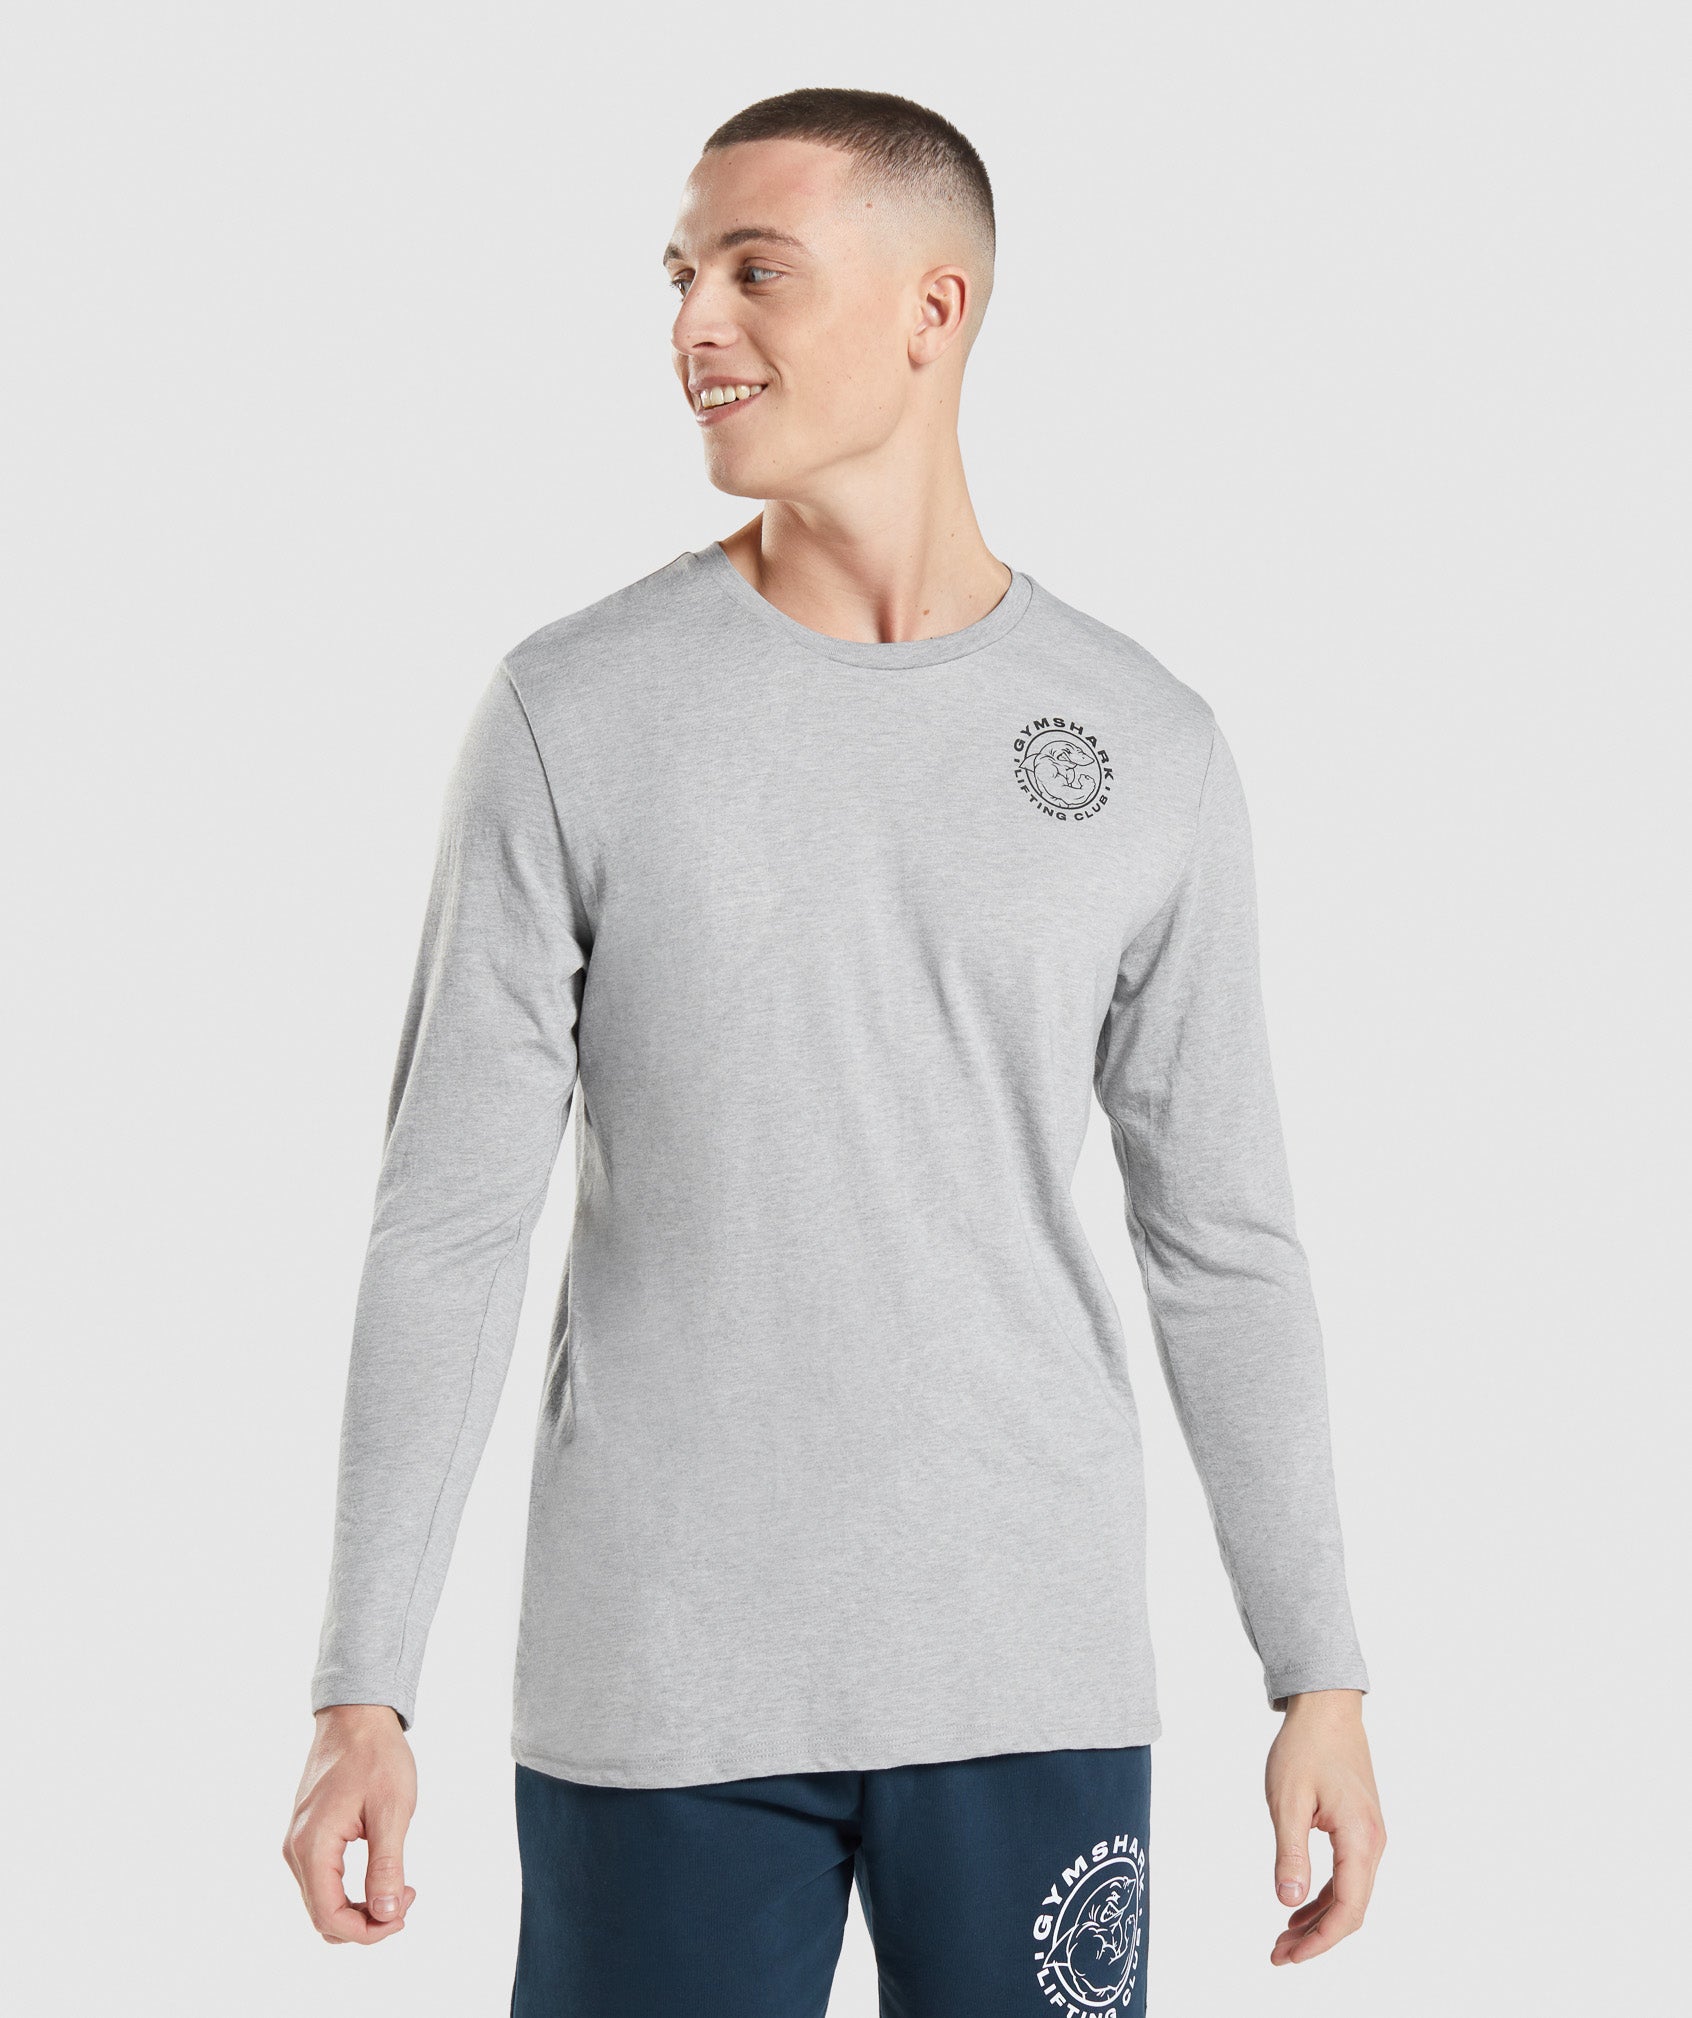 Legacy Long Sleeve T-Shirt in Light Grey Core Marl - view 1